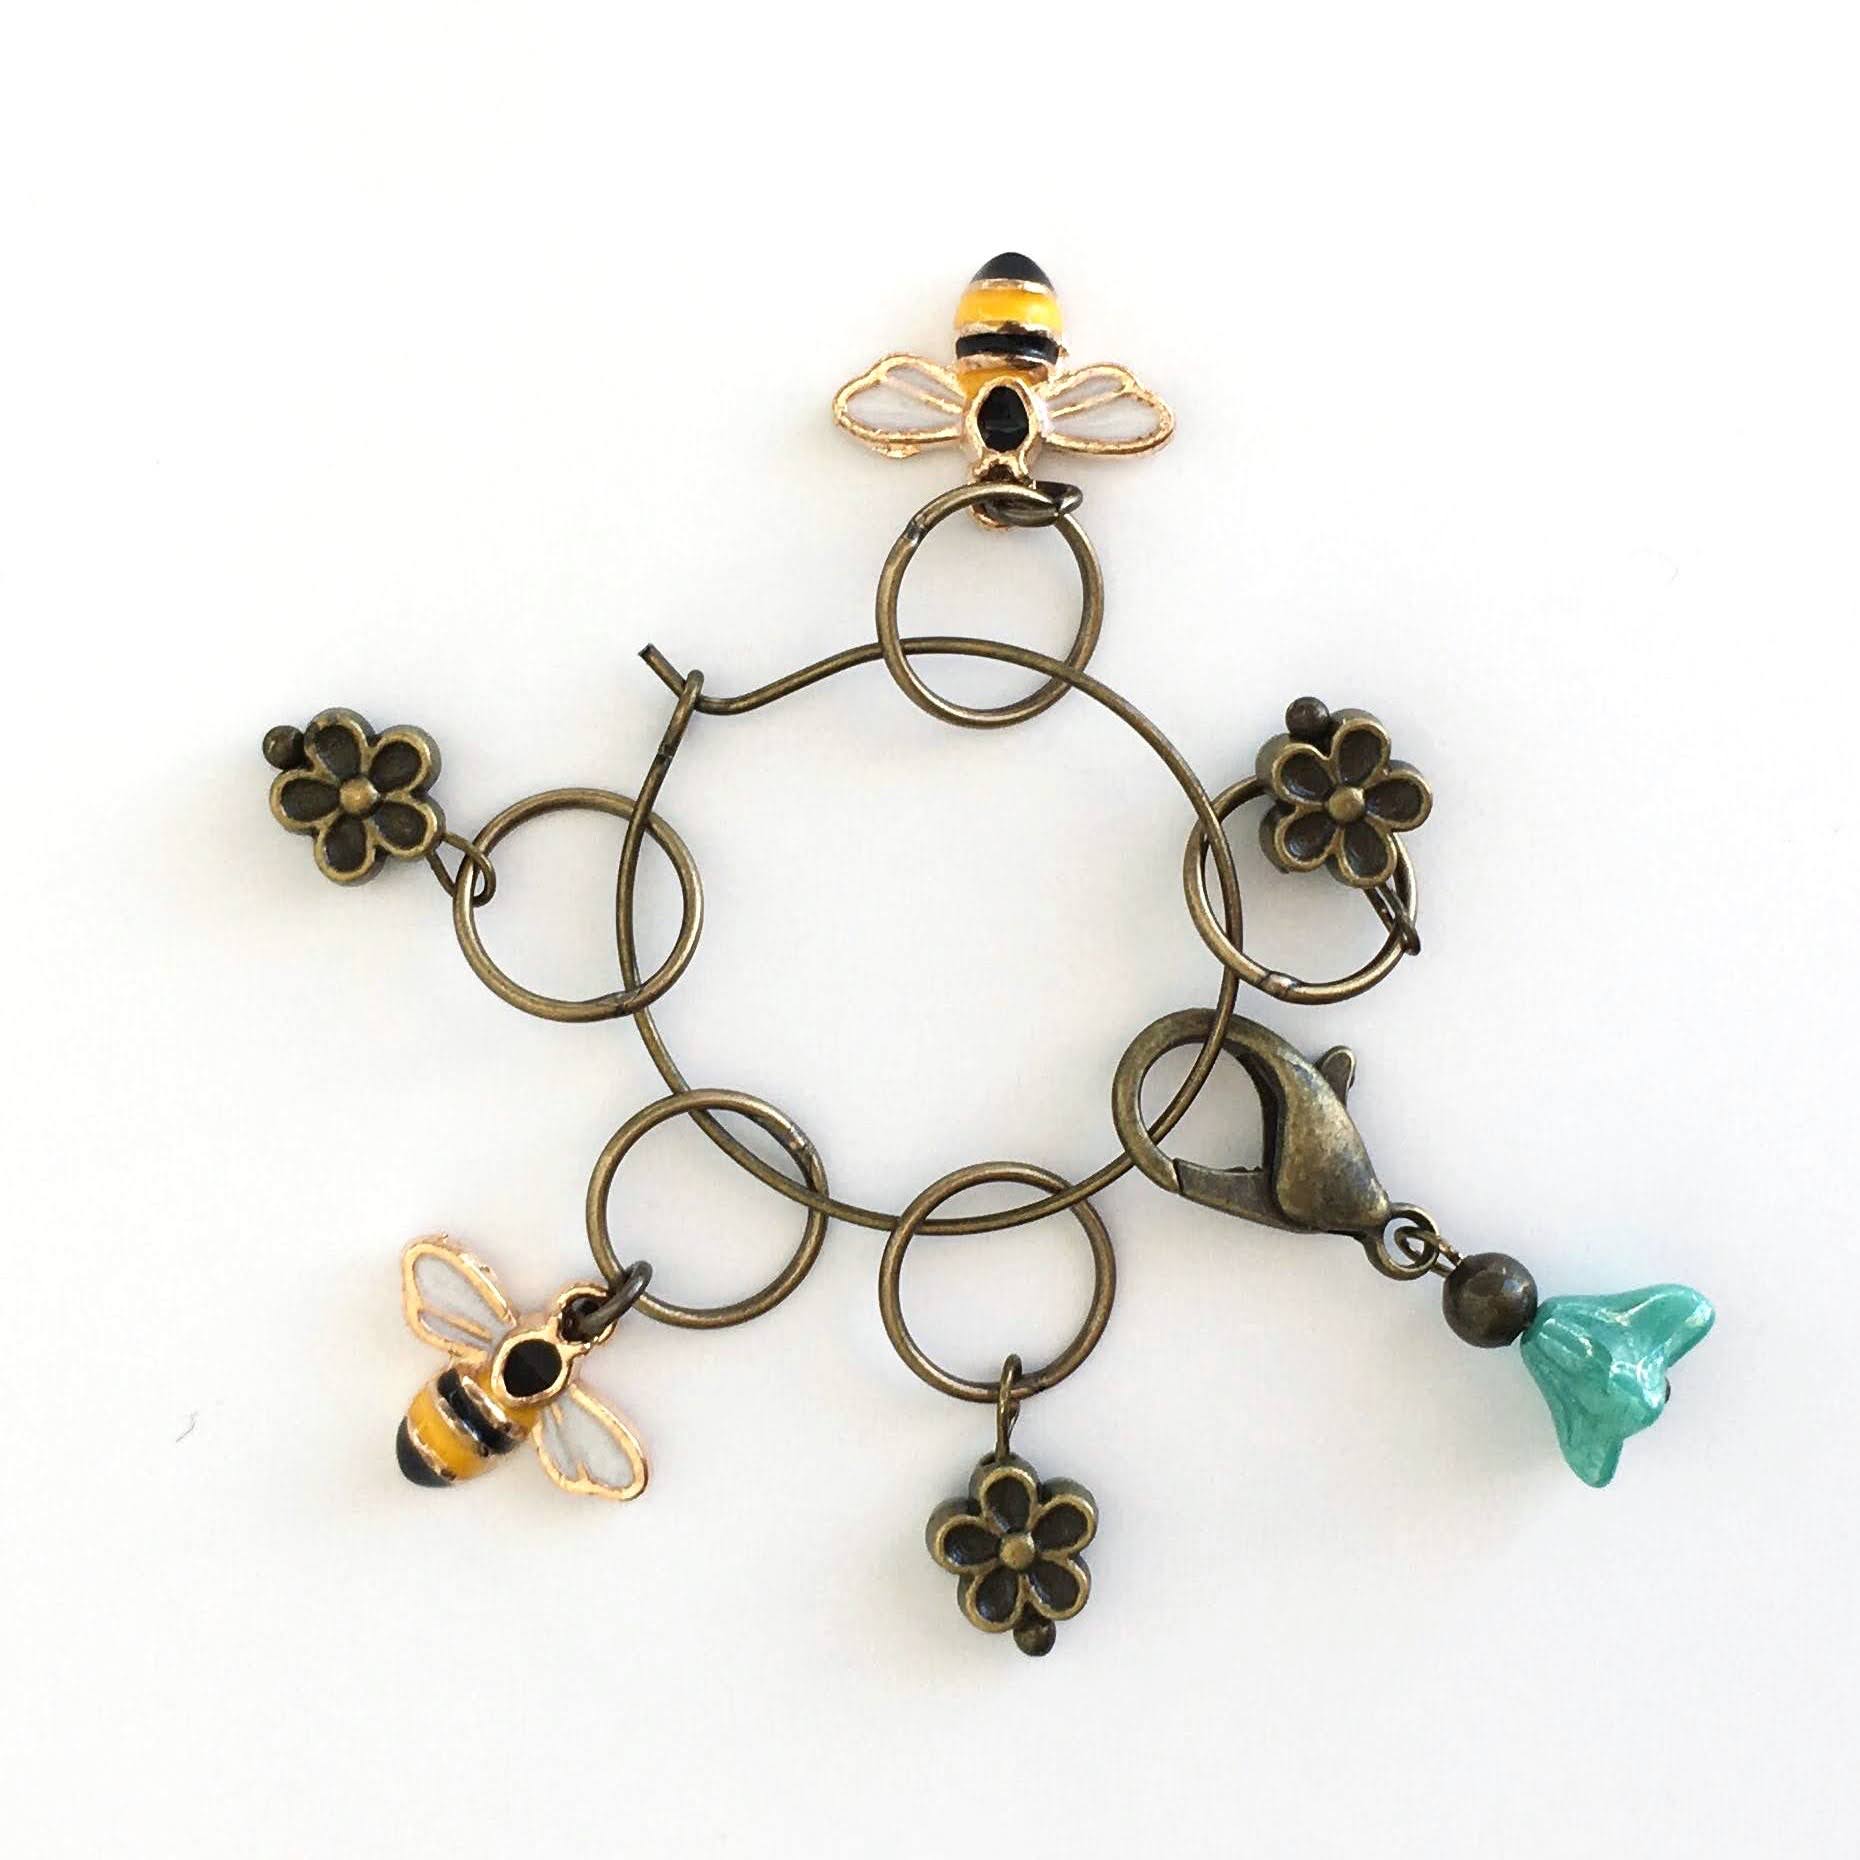 NNK Bee and Bloom Stitch Marker Set